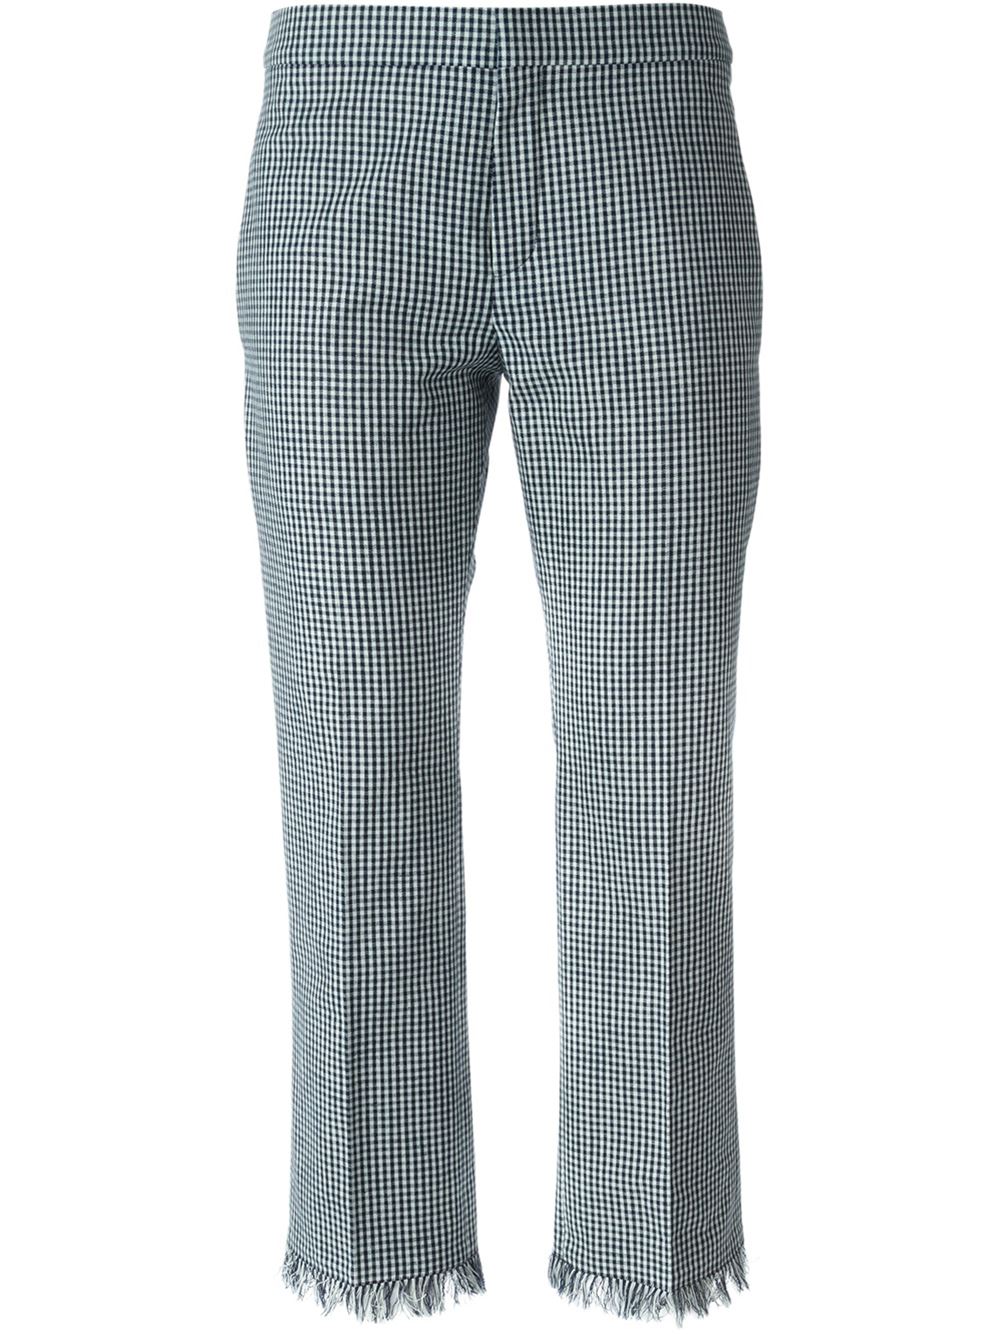 Gingham Style for Spring/Summer 2015 - Posh Point